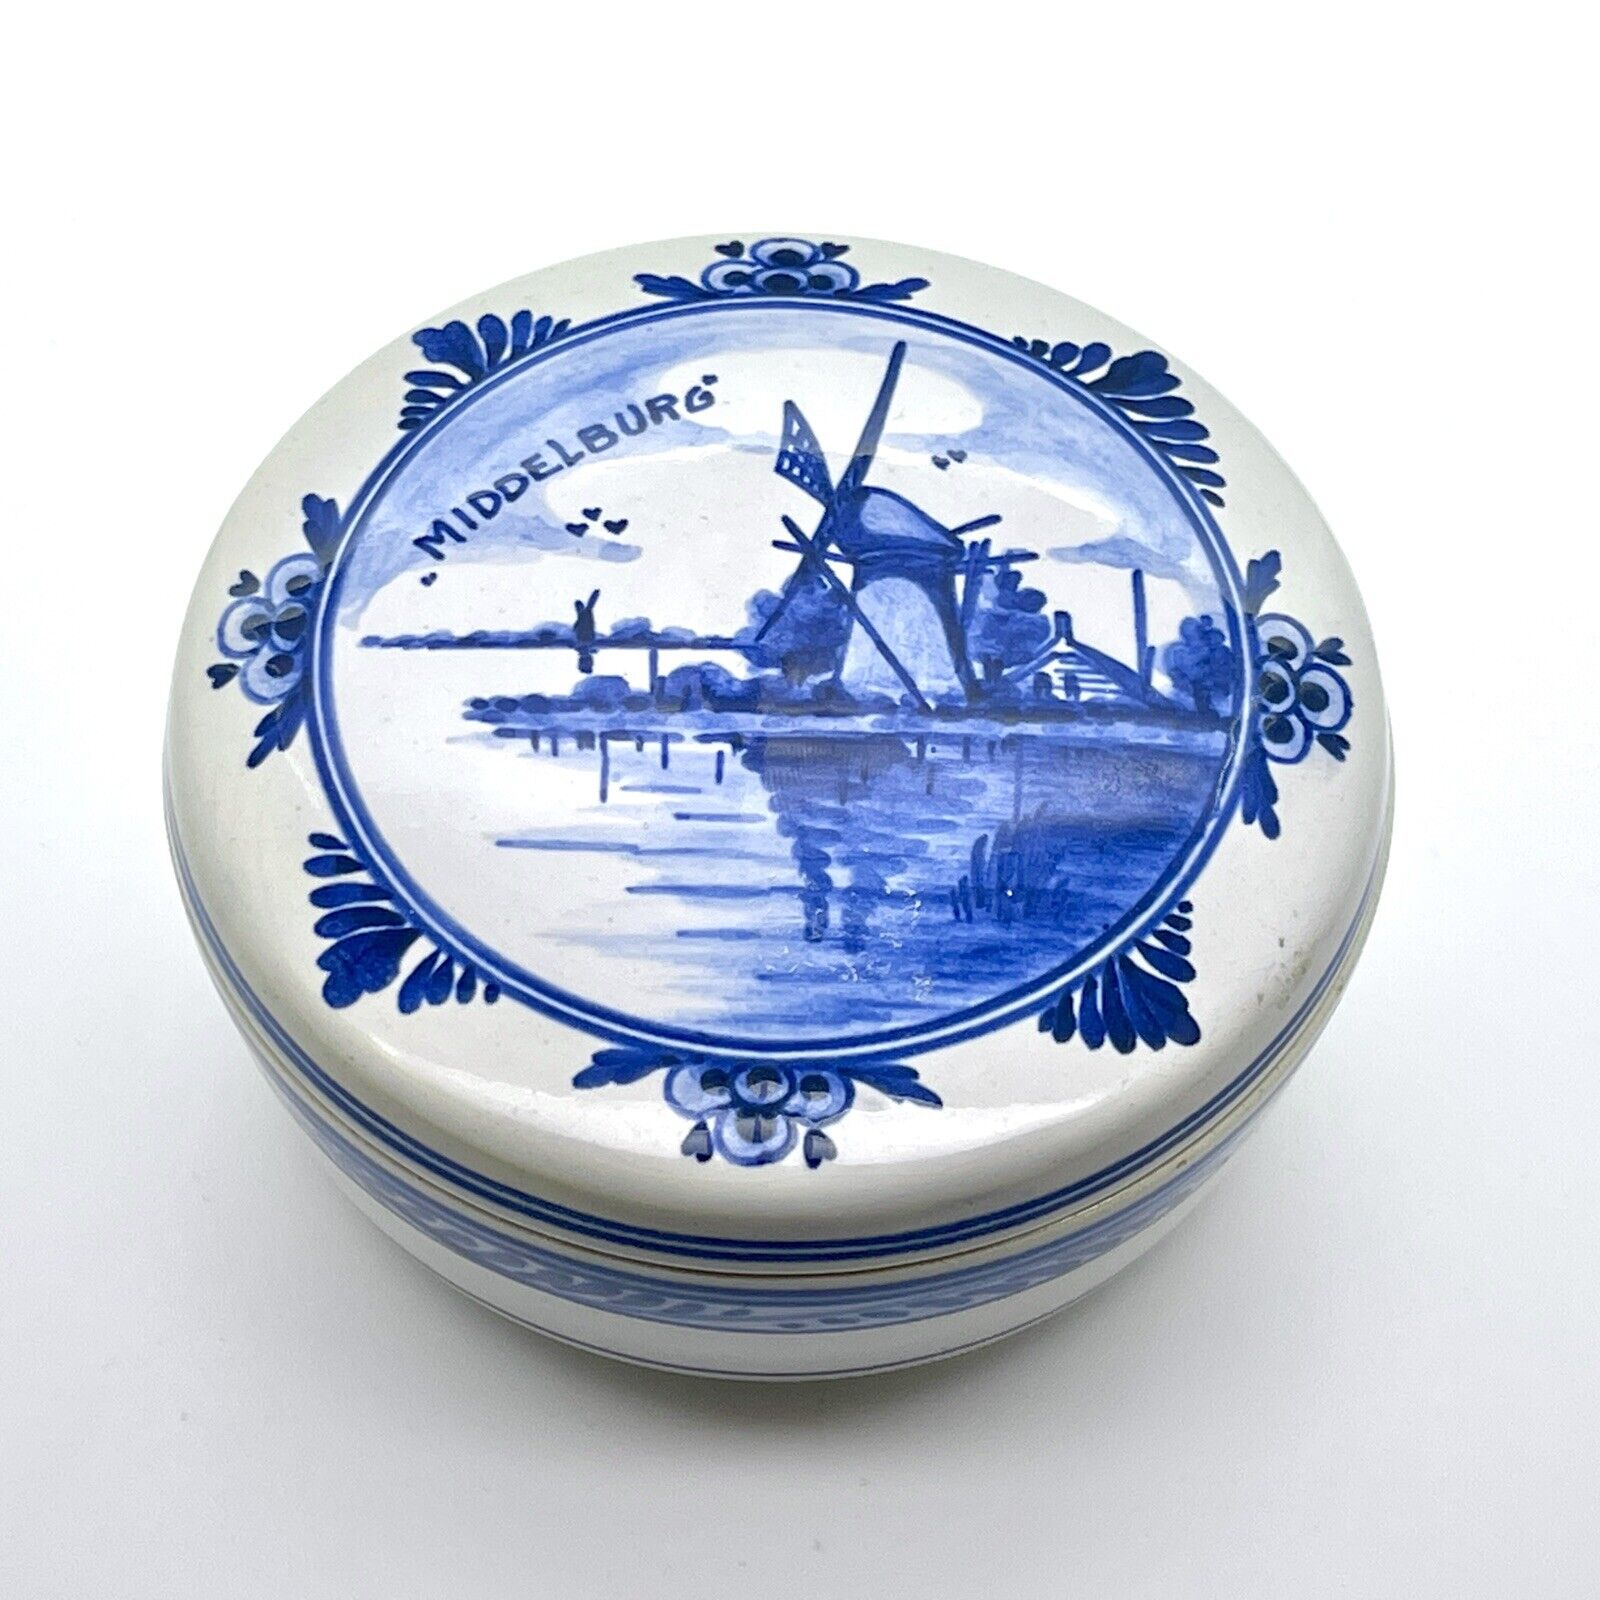 Antique Valuations: Delft Blue pot Trinket Dish With Lid - With Image of Windmill Holland MiddelBurg